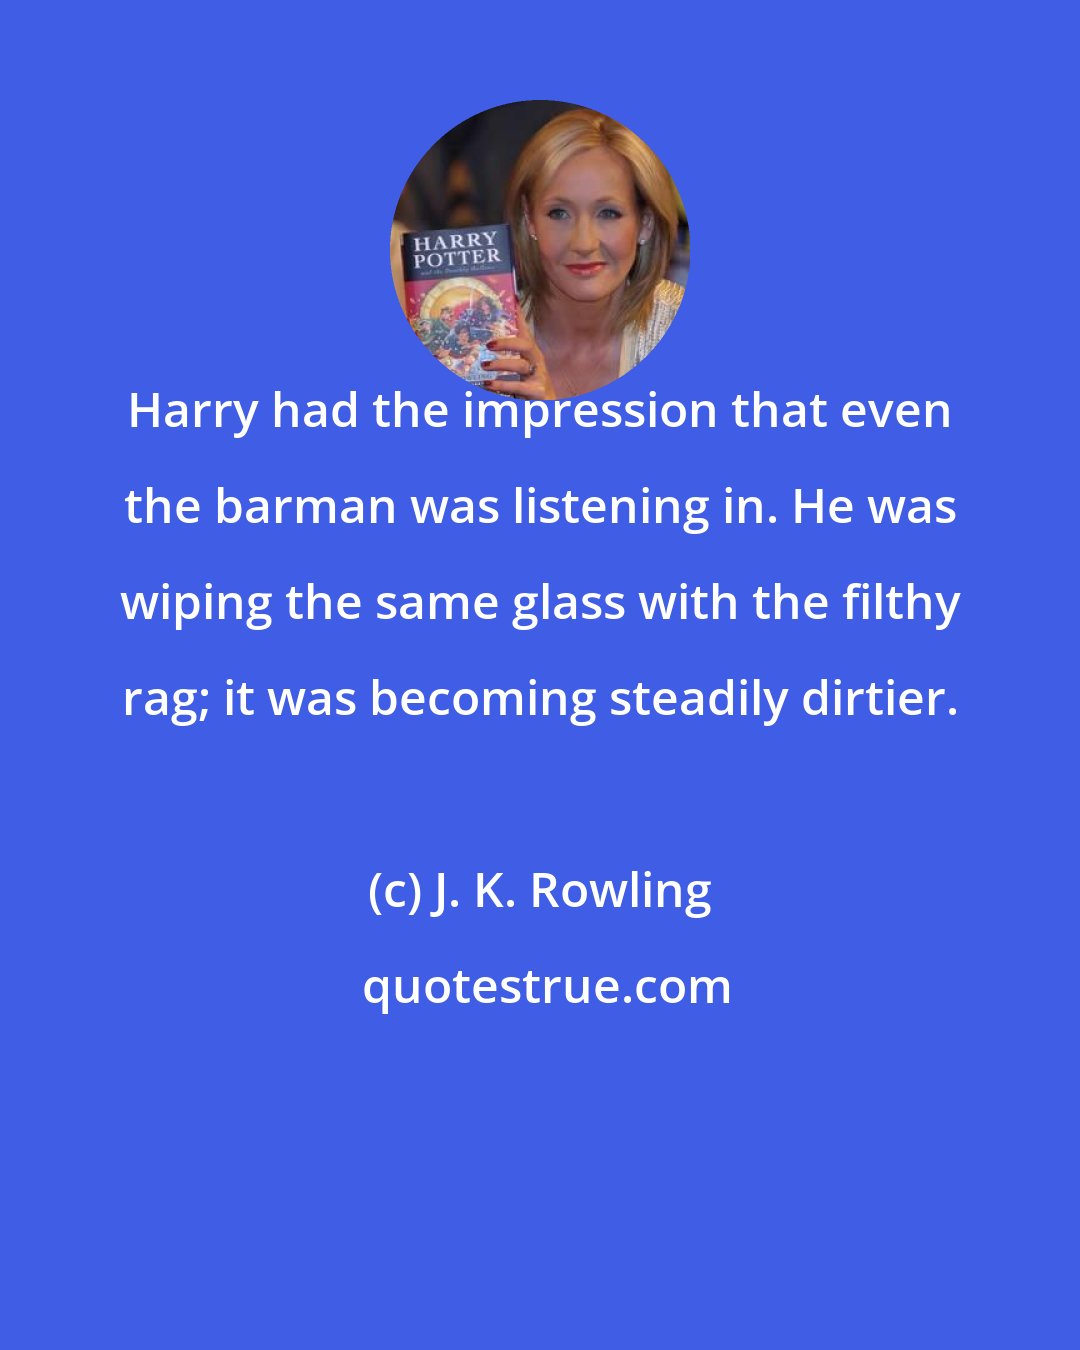 J. K. Rowling: Harry had the impression that even the barman was listening in. He was wiping the same glass with the filthy rag; it was becoming steadily dirtier.